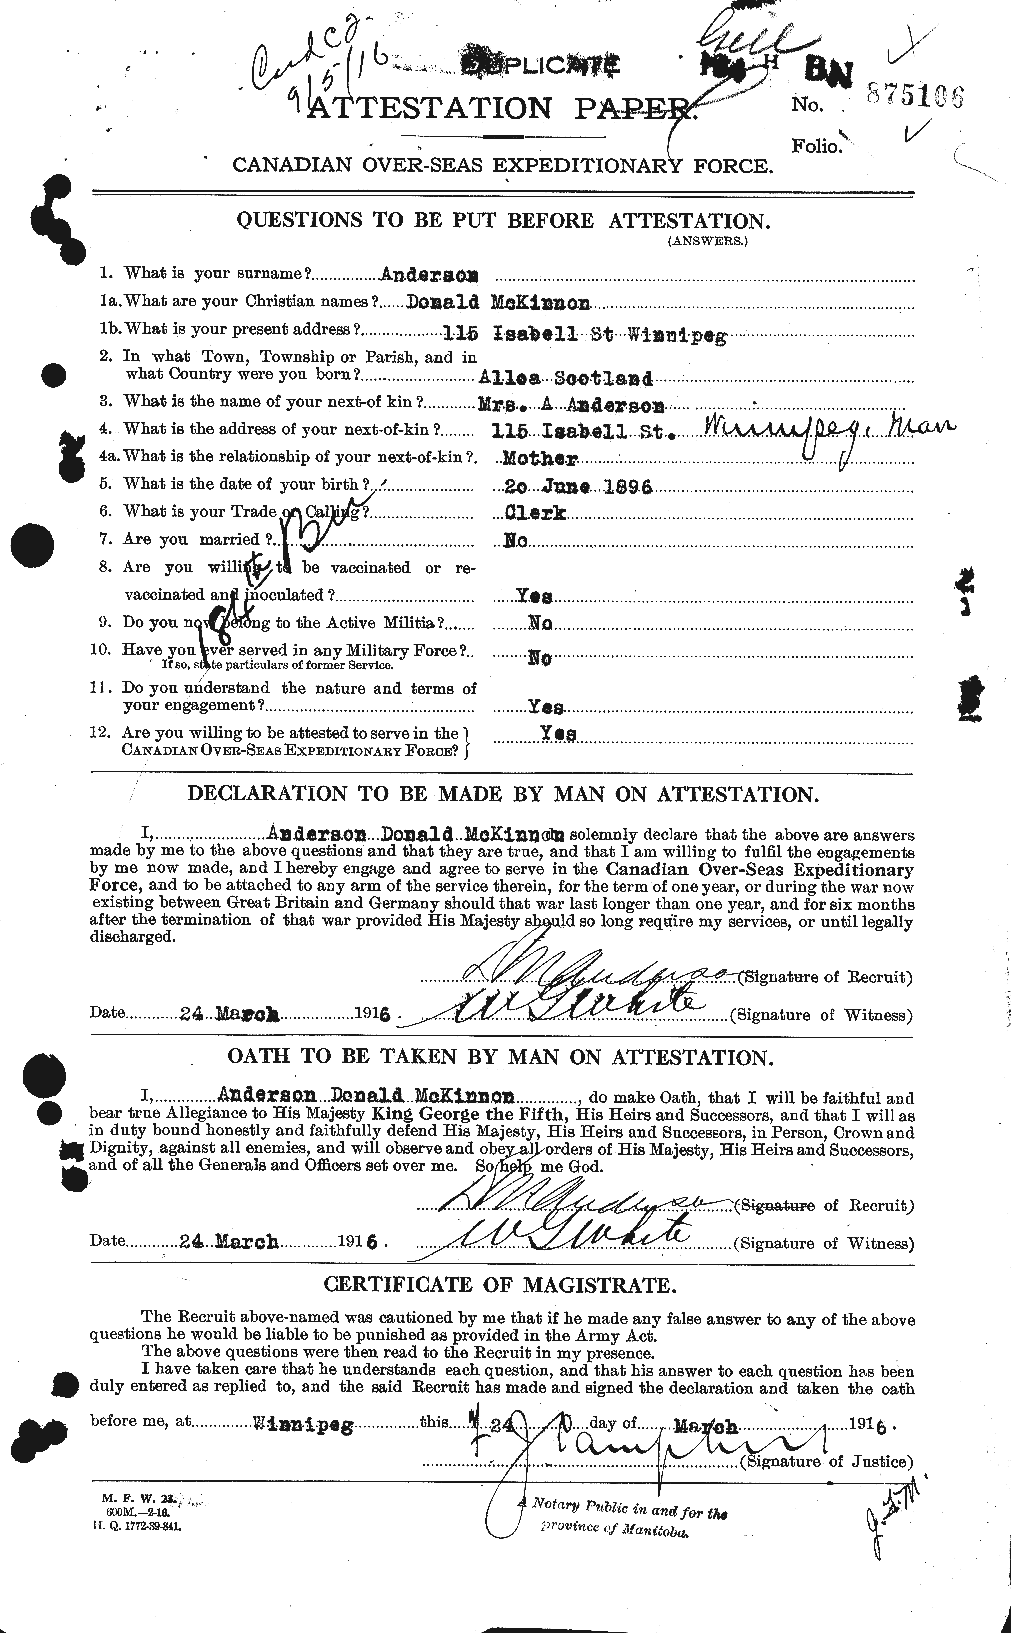 Personnel Records of the First World War - CEF 209980a